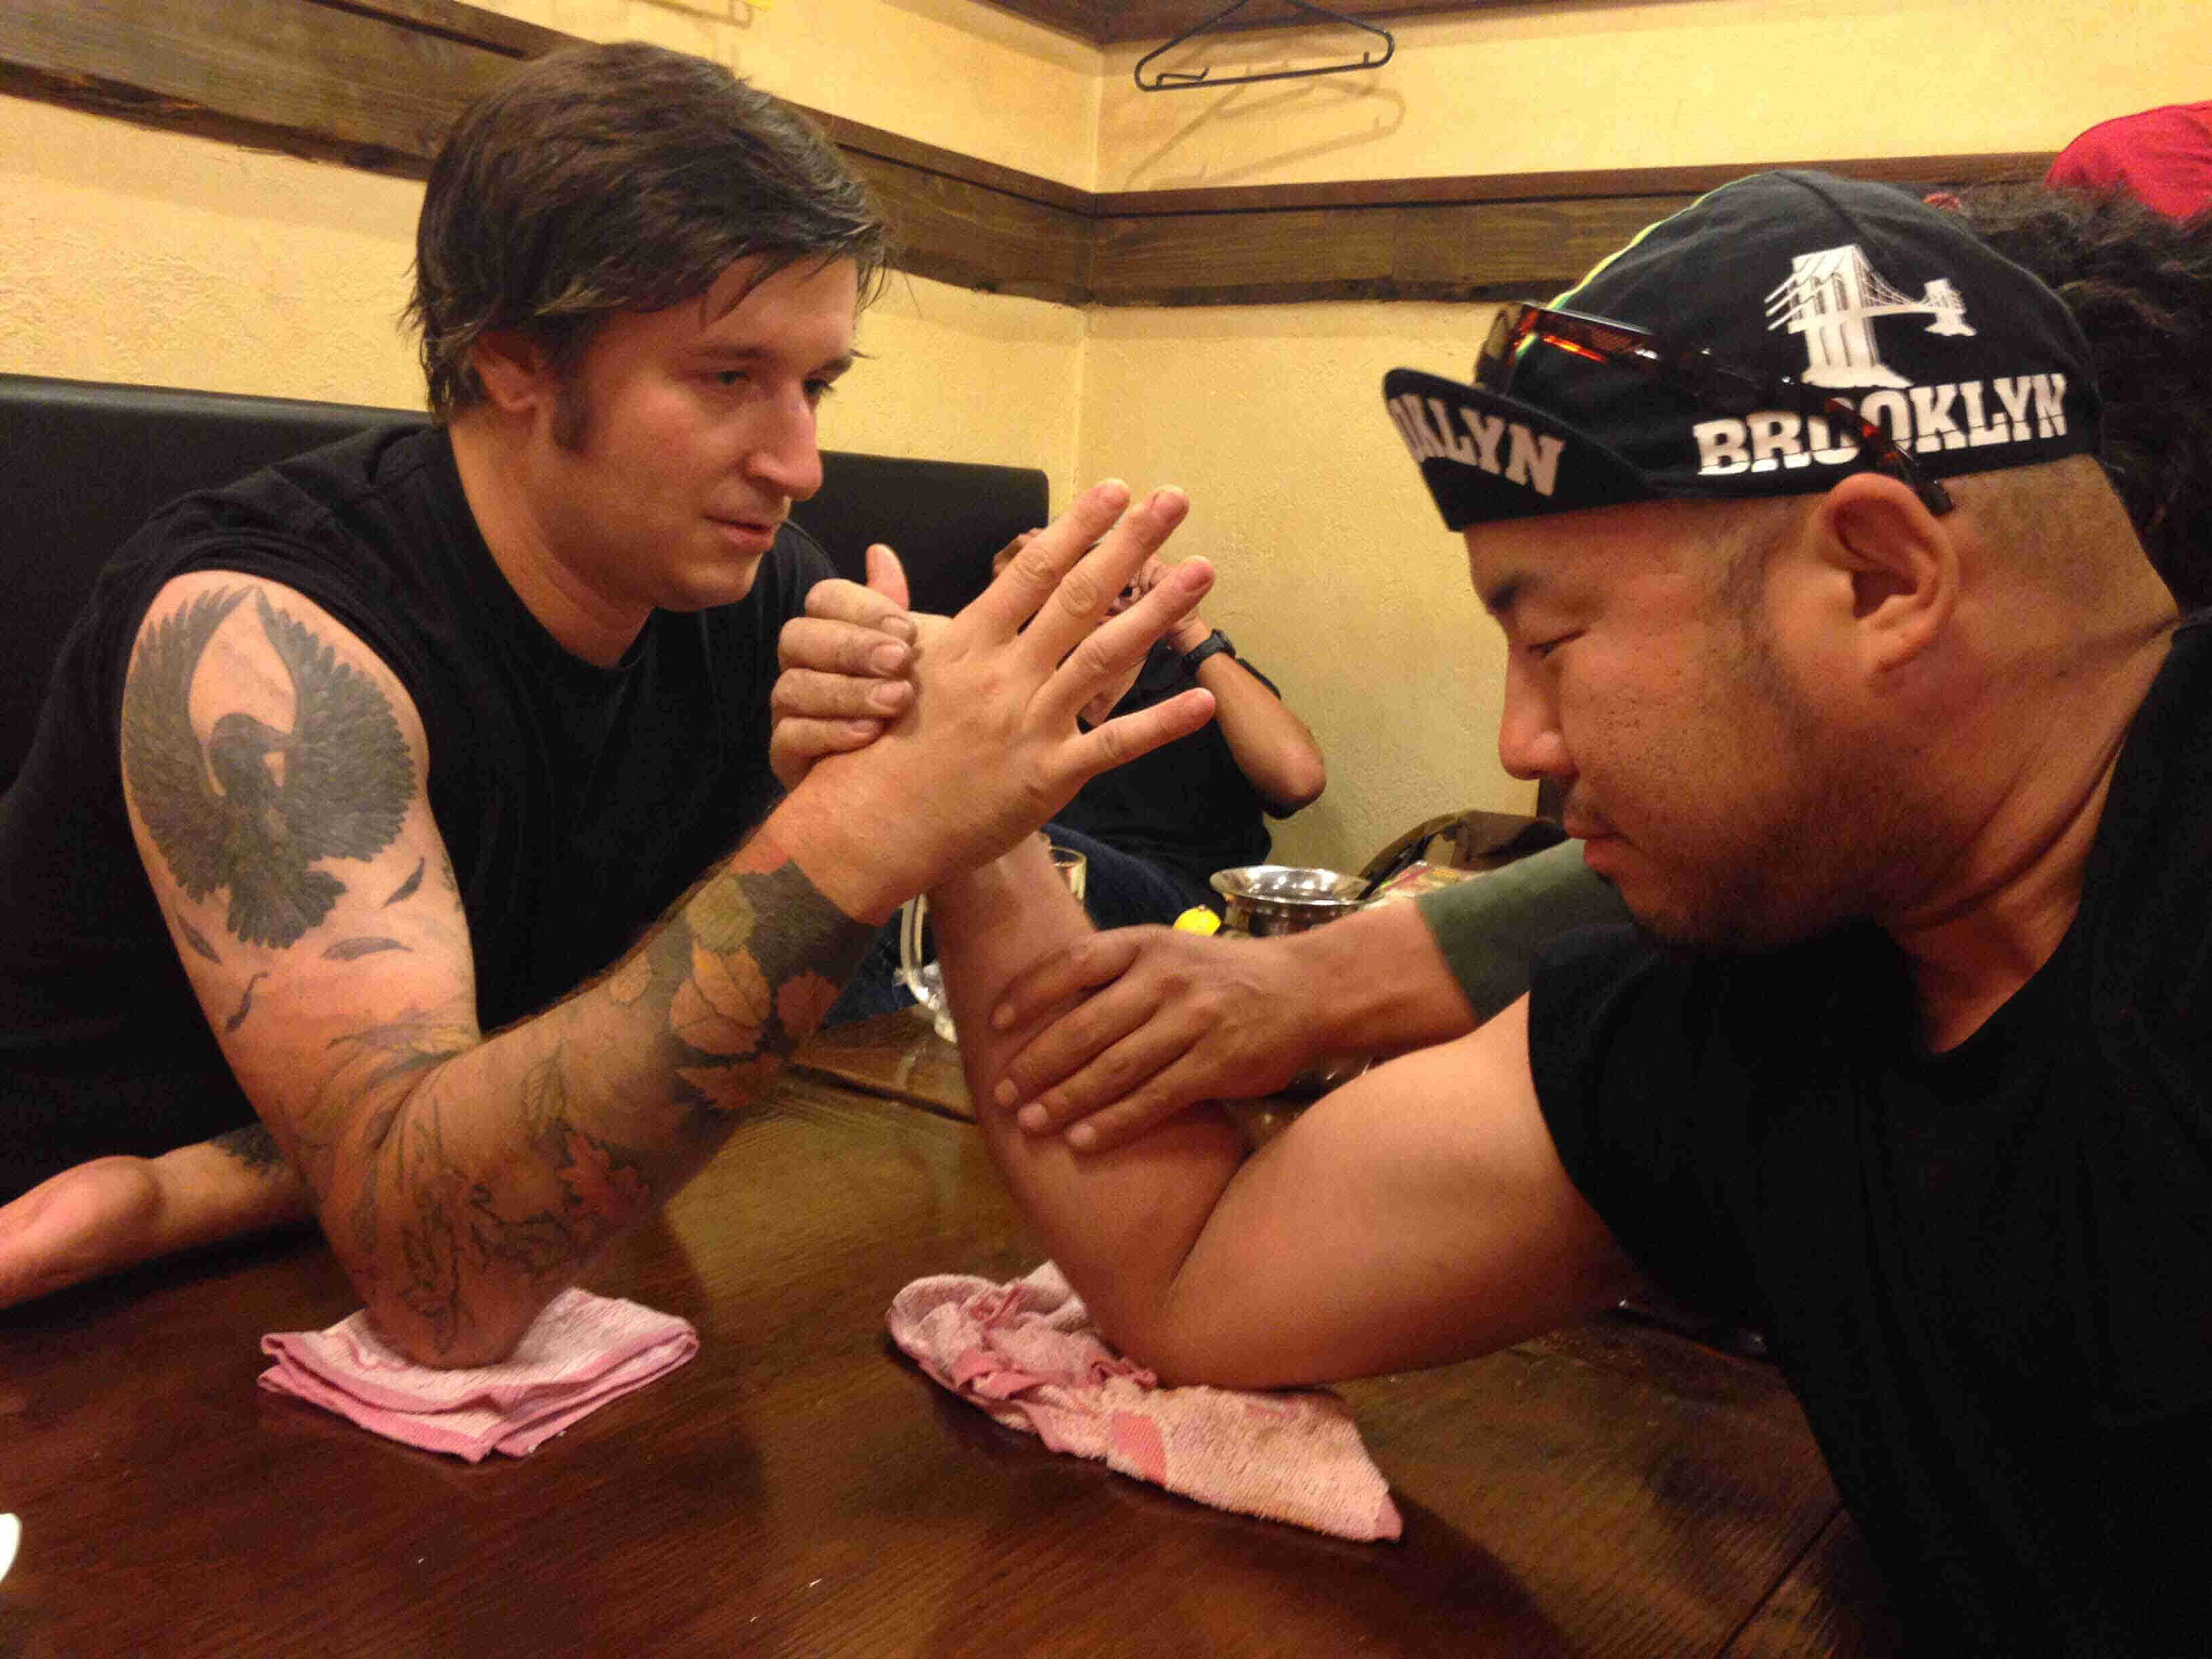 Side view of two people sitting across from each other, arm wrestling at a table